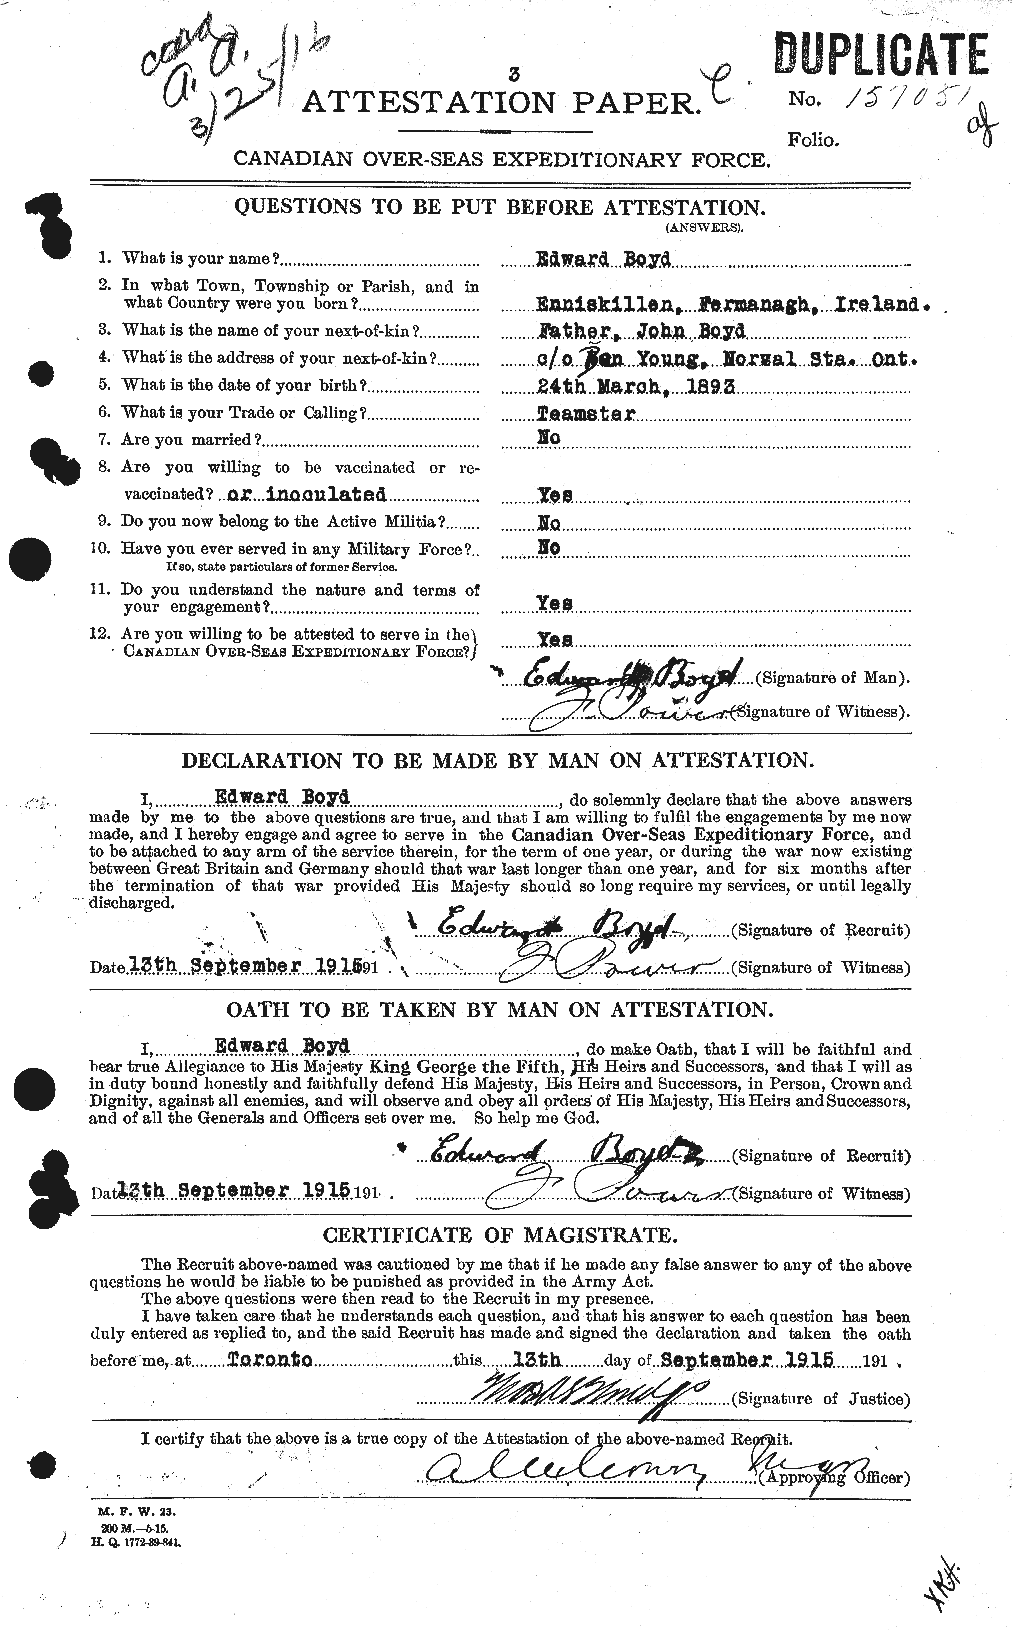 Personnel Records of the First World War - CEF 256959a